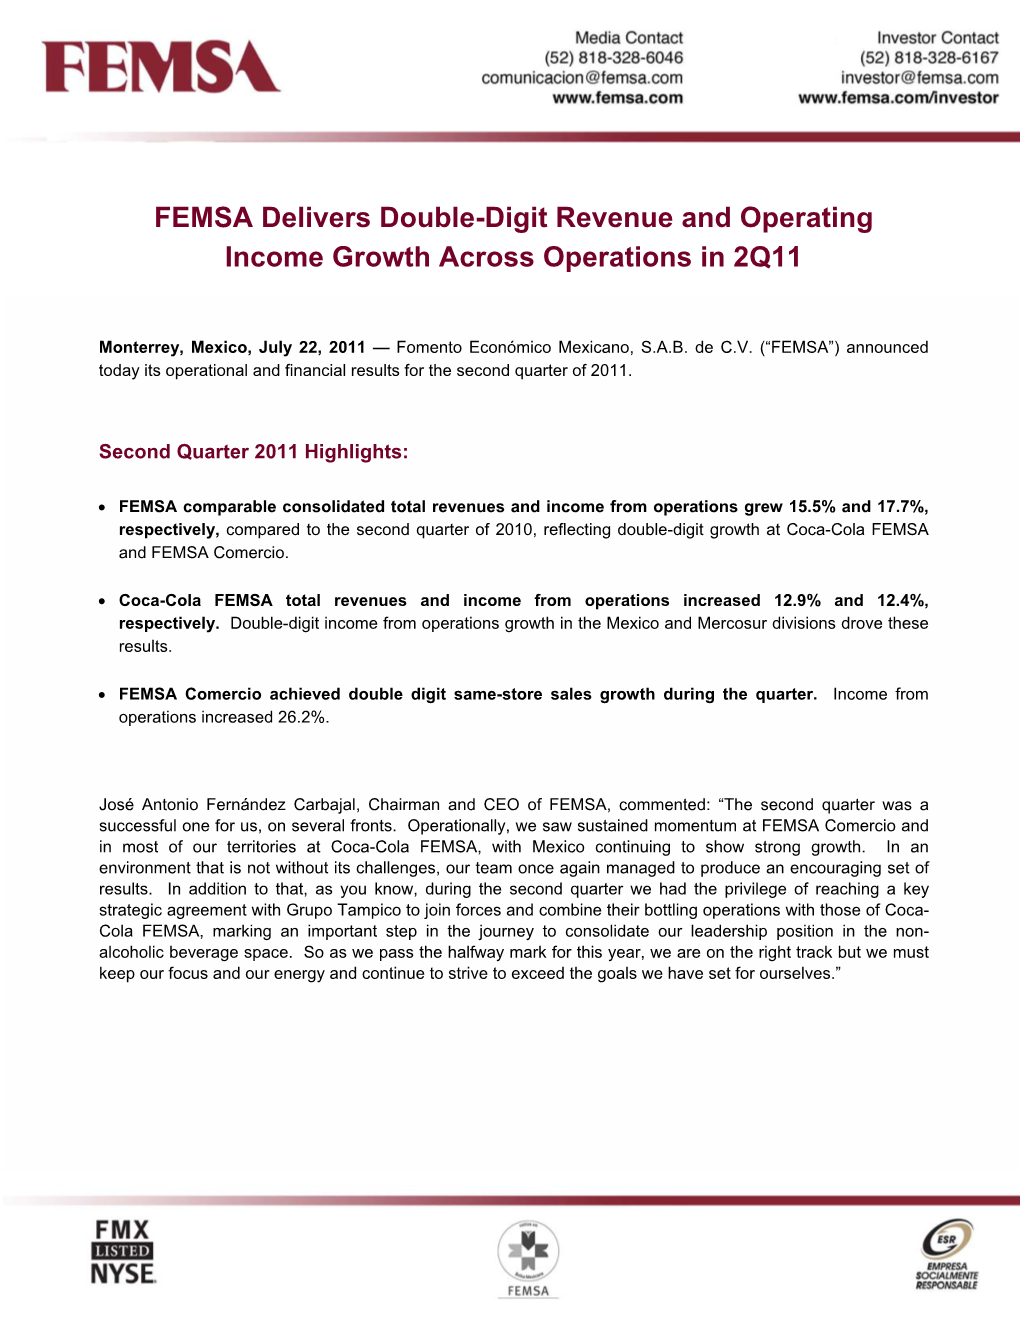 FEMSA Delivers Double-Digit Revenue and Operating Income Growth Across Operations in 2Q11